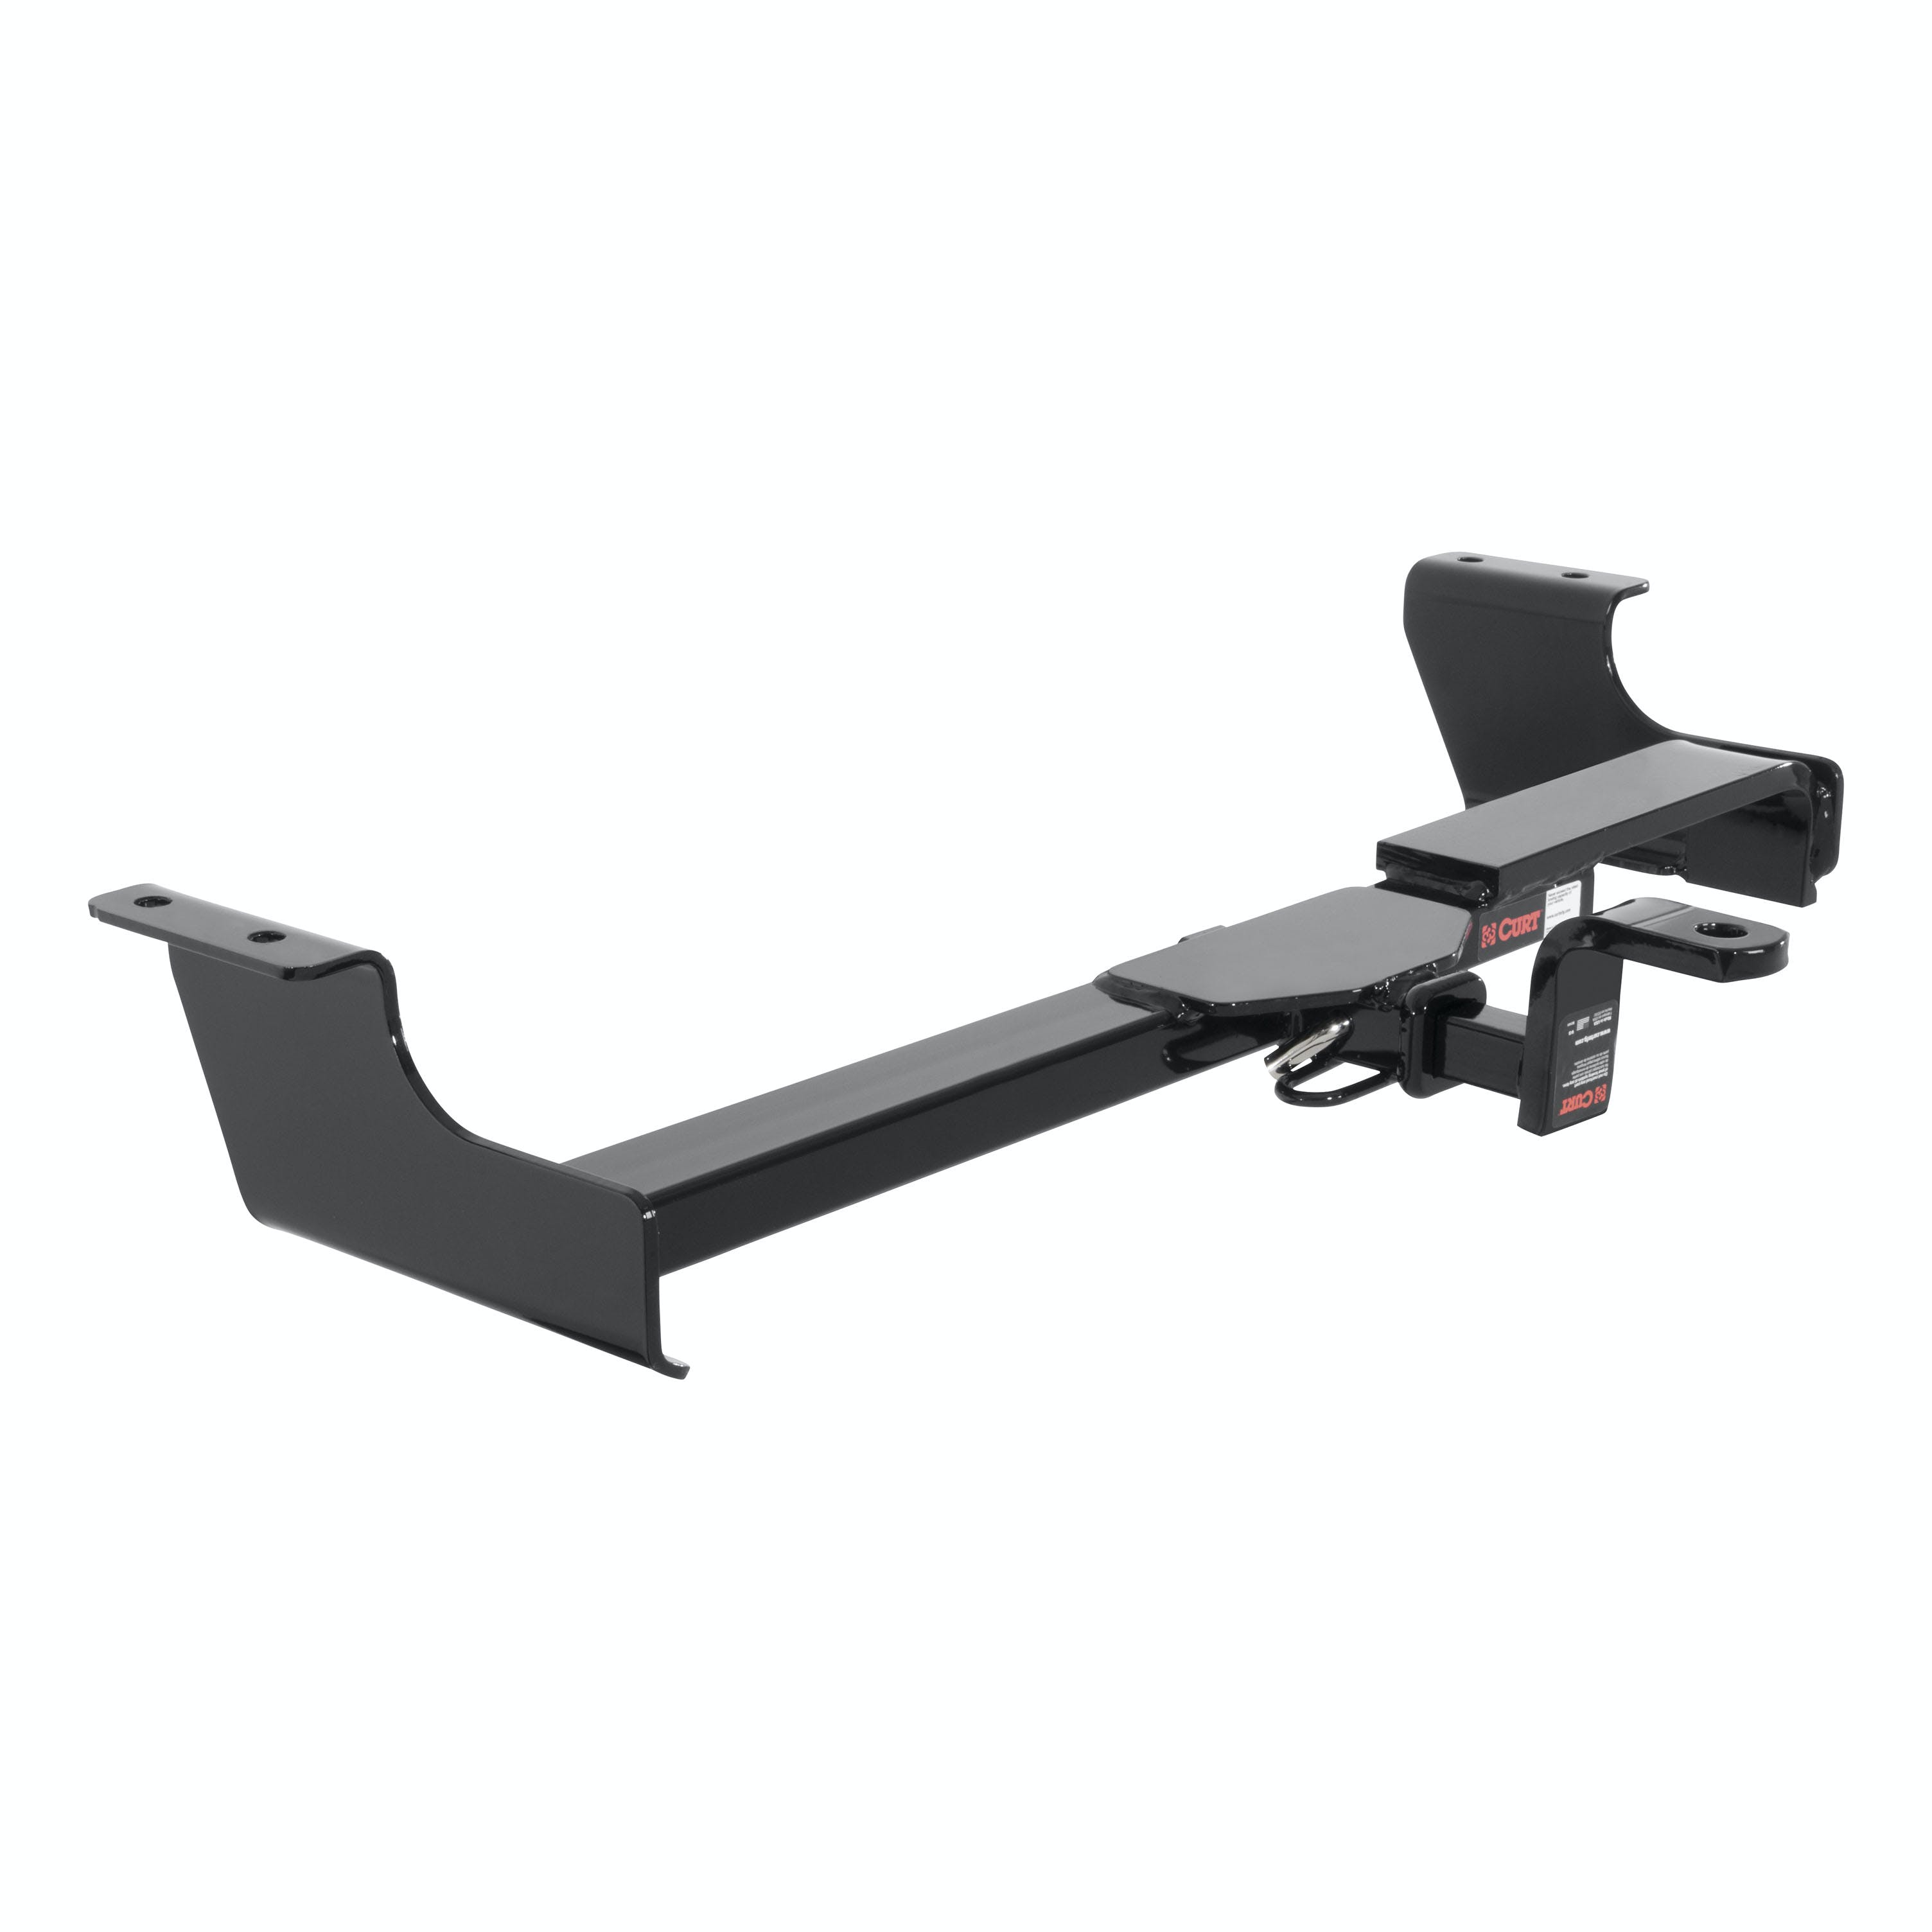 CURT 114683 Class 1 Trailer Hitch, 1-1/4 Ball Mount, Select Toyota Prius